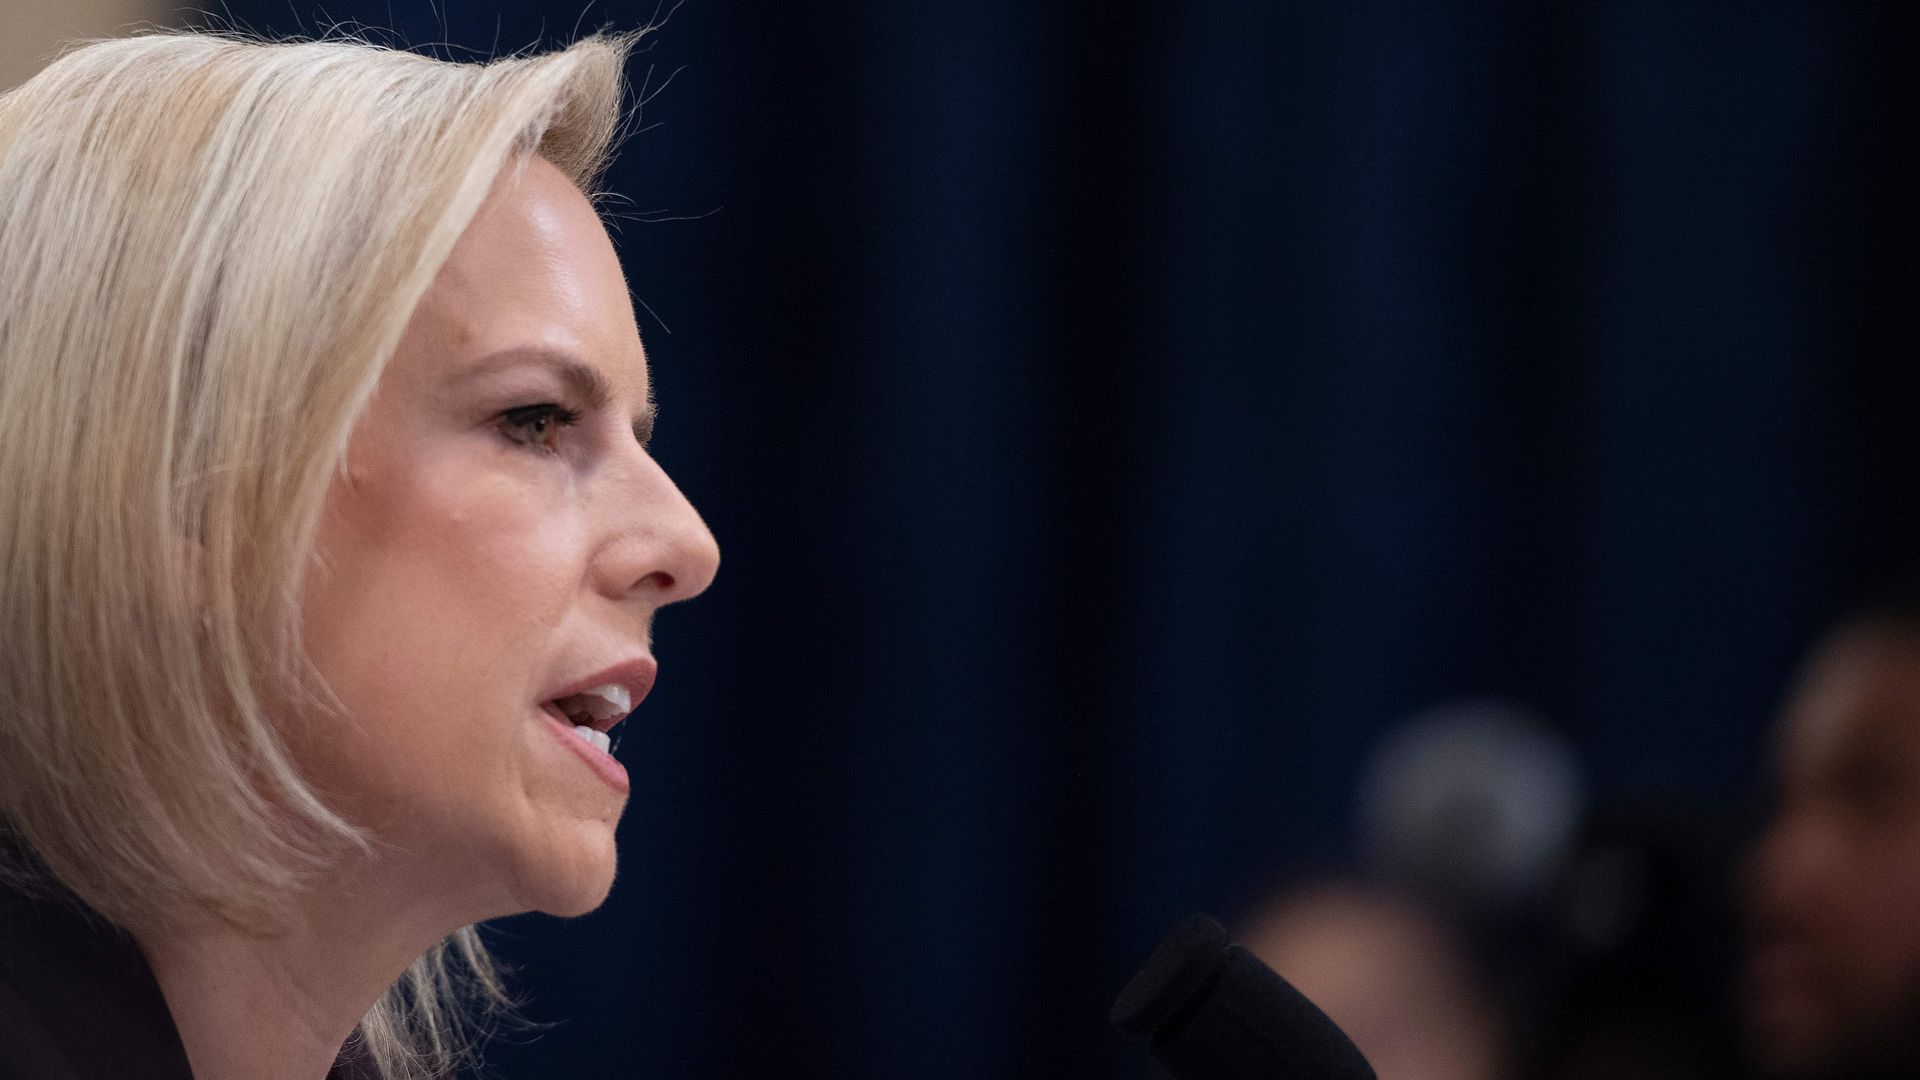 DHS Secretary Kirstjen Nielsen's profile as she speaks into a microphone with a serious face. 